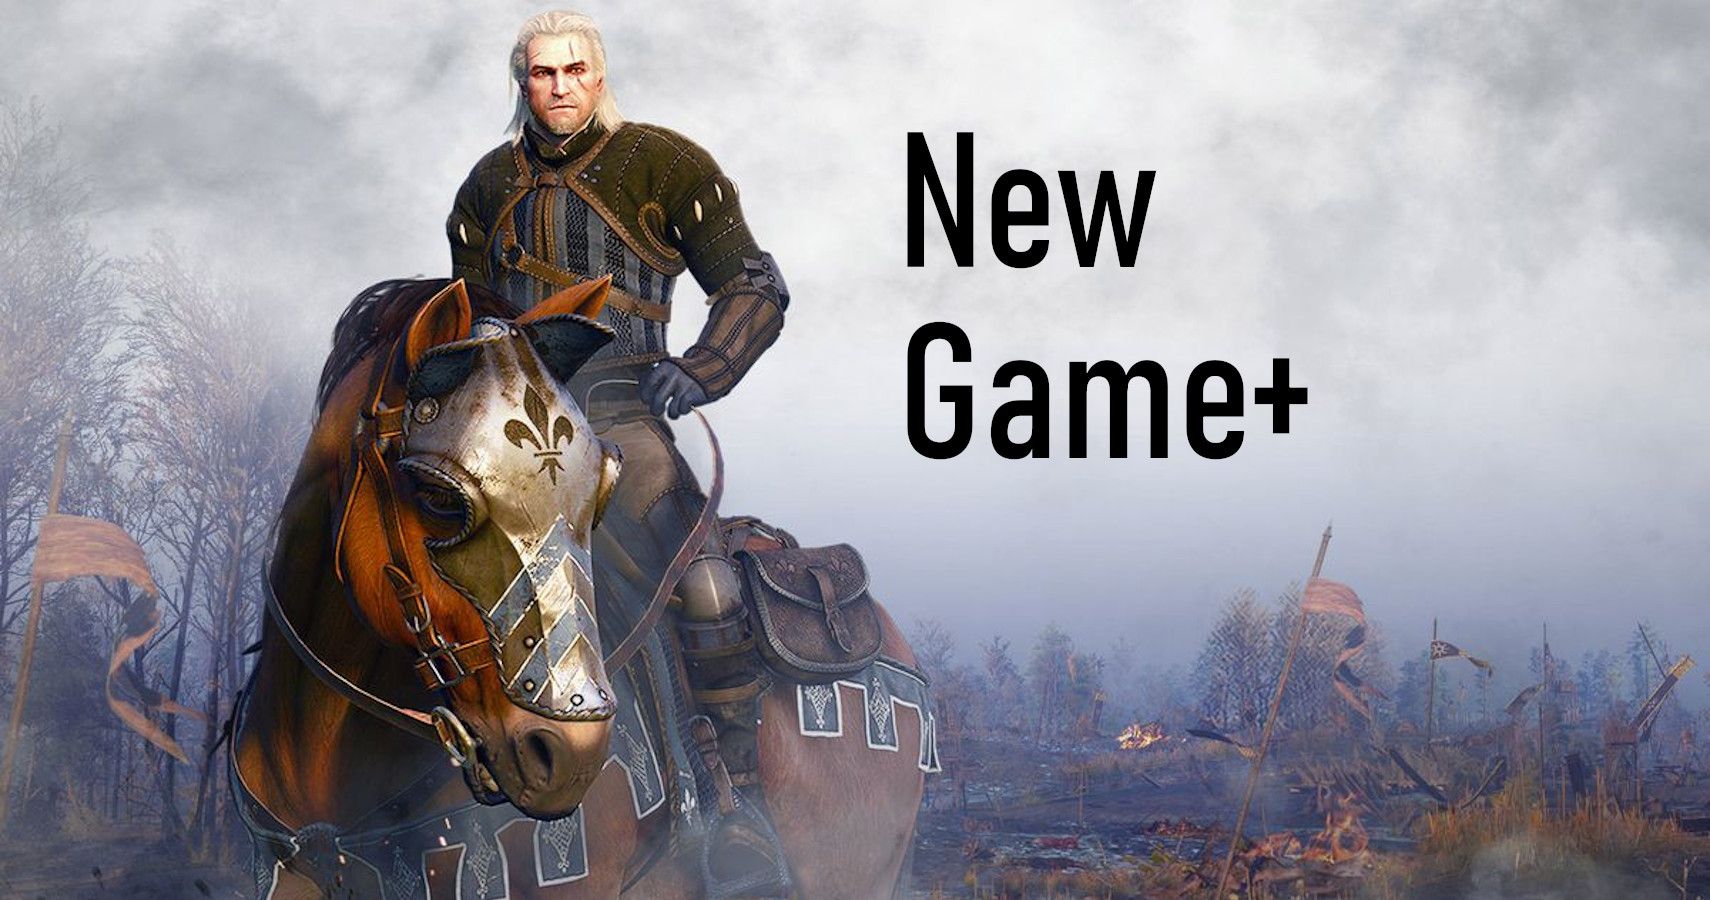 Why The Witcher 3 Is Better In New Game Plus